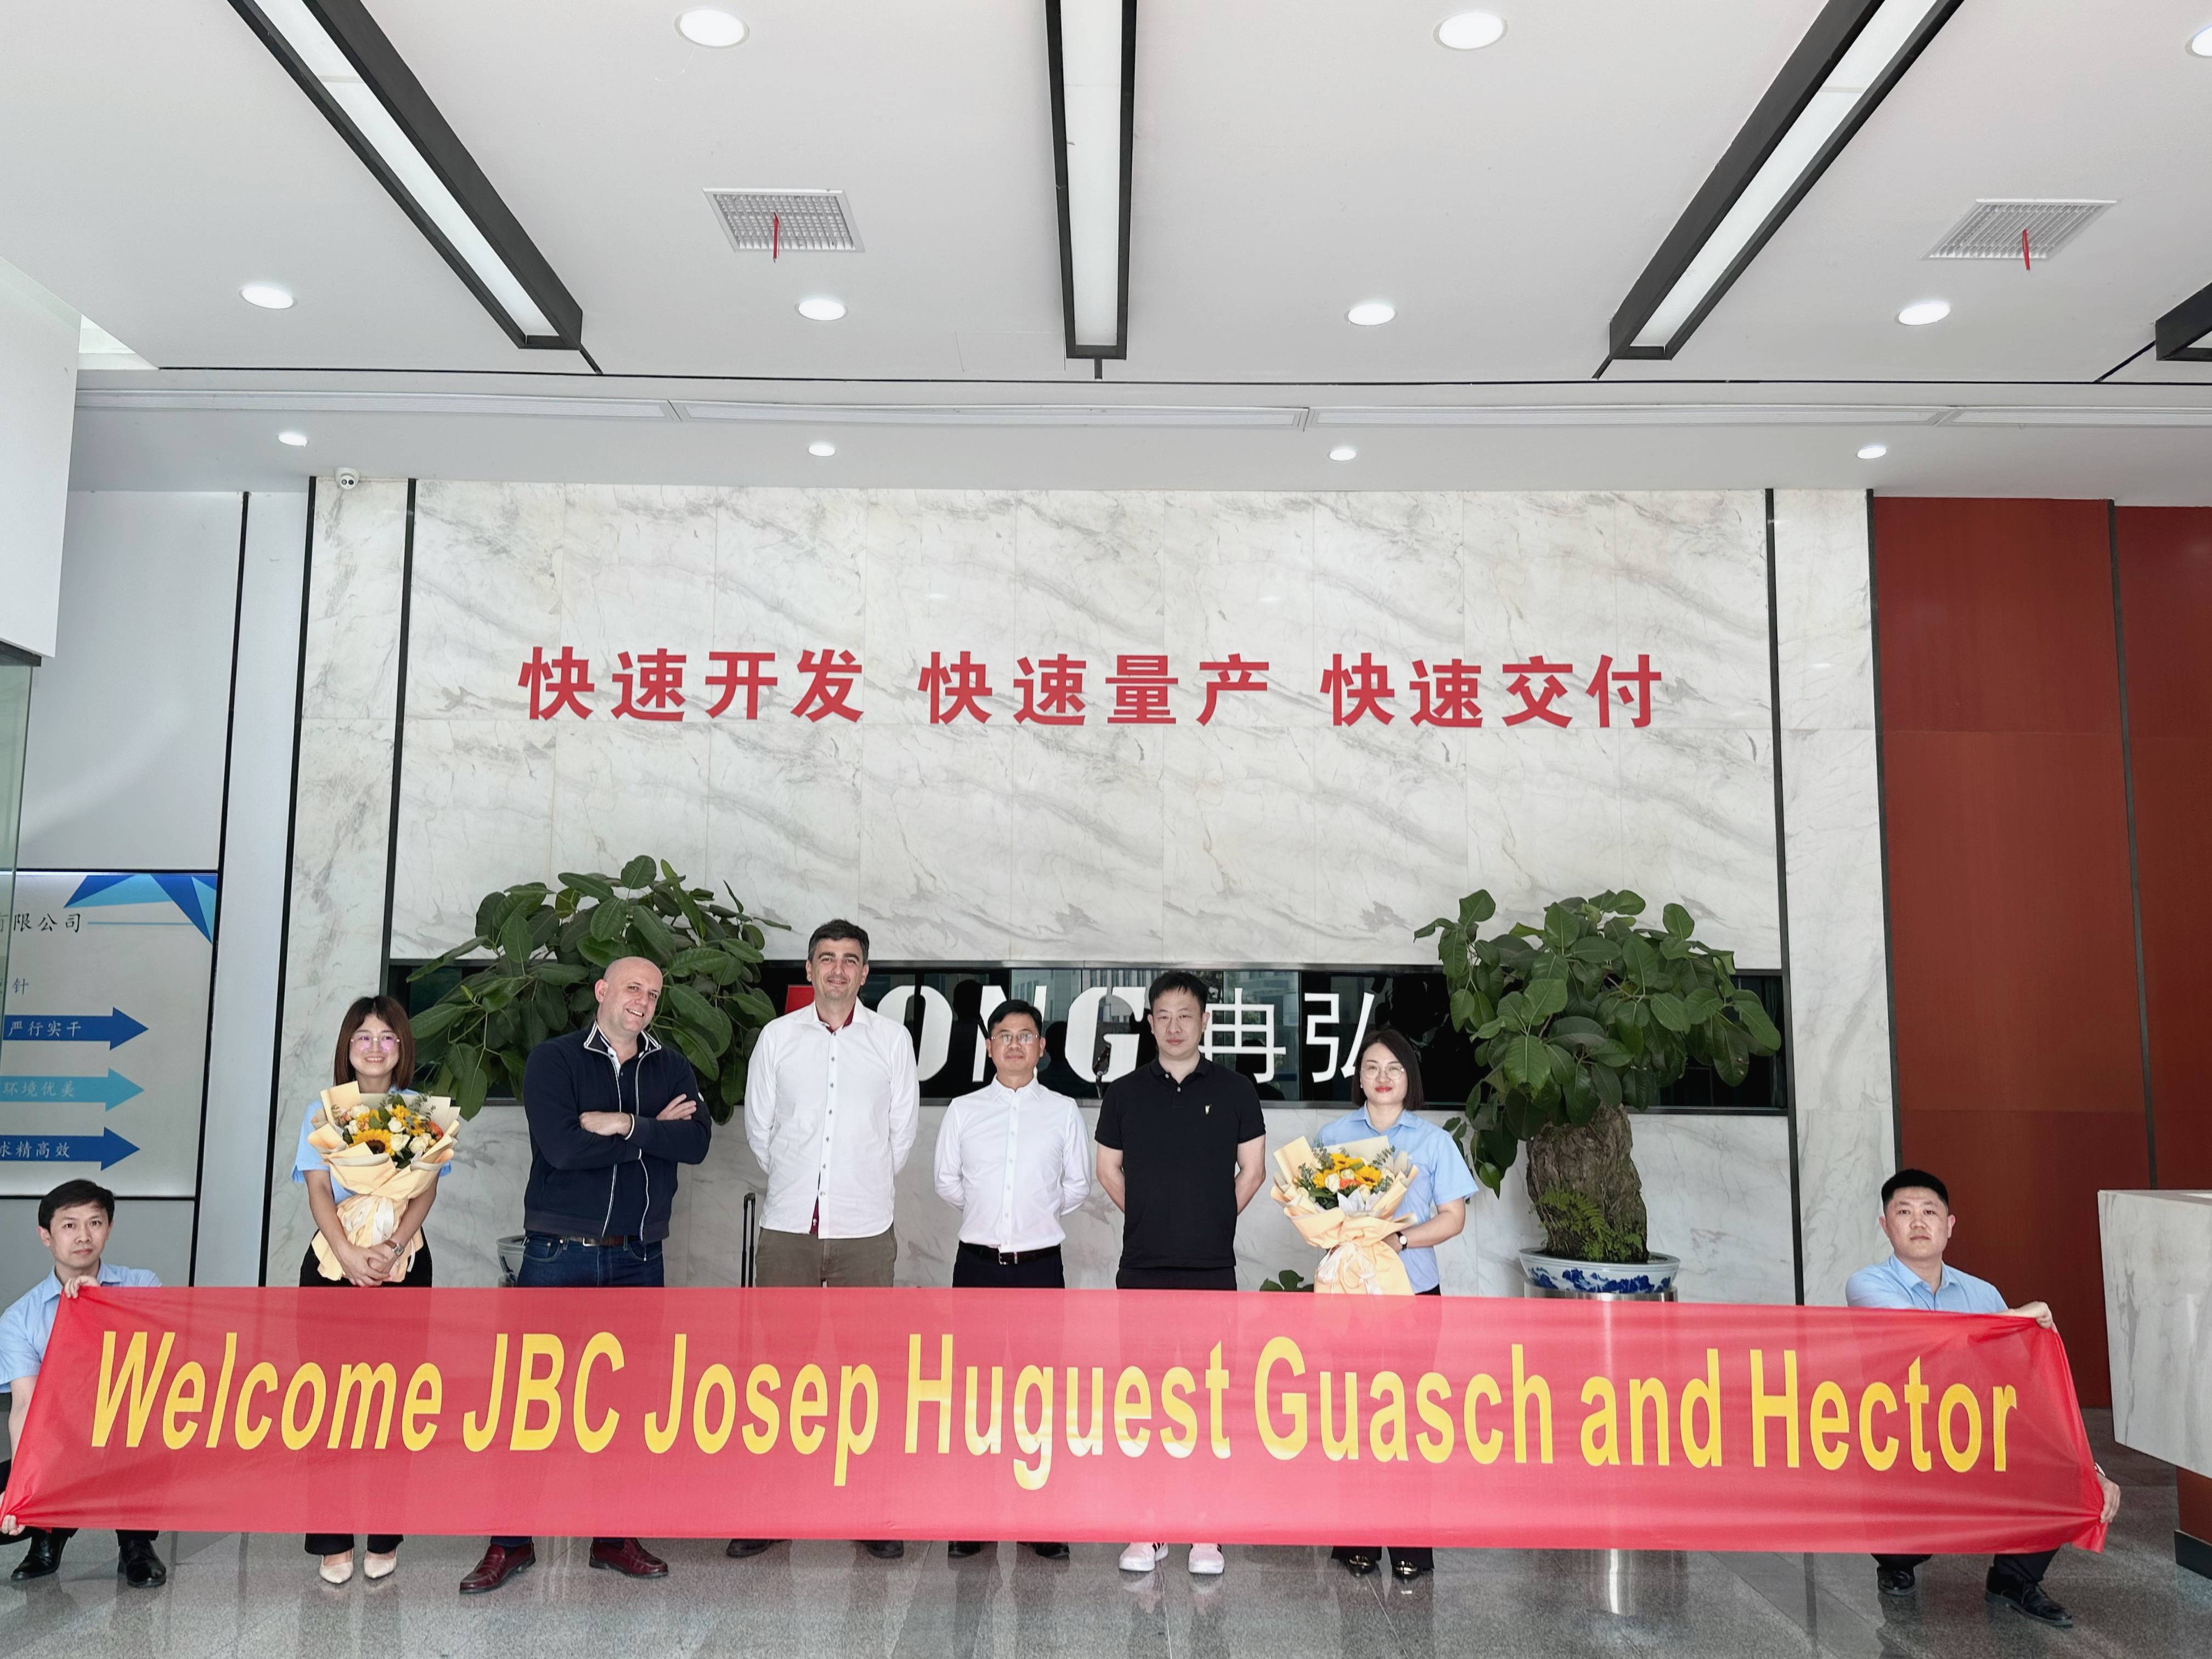 JBC Customers From Spain Visit Our factory to Promote International Cooperation And Exchange